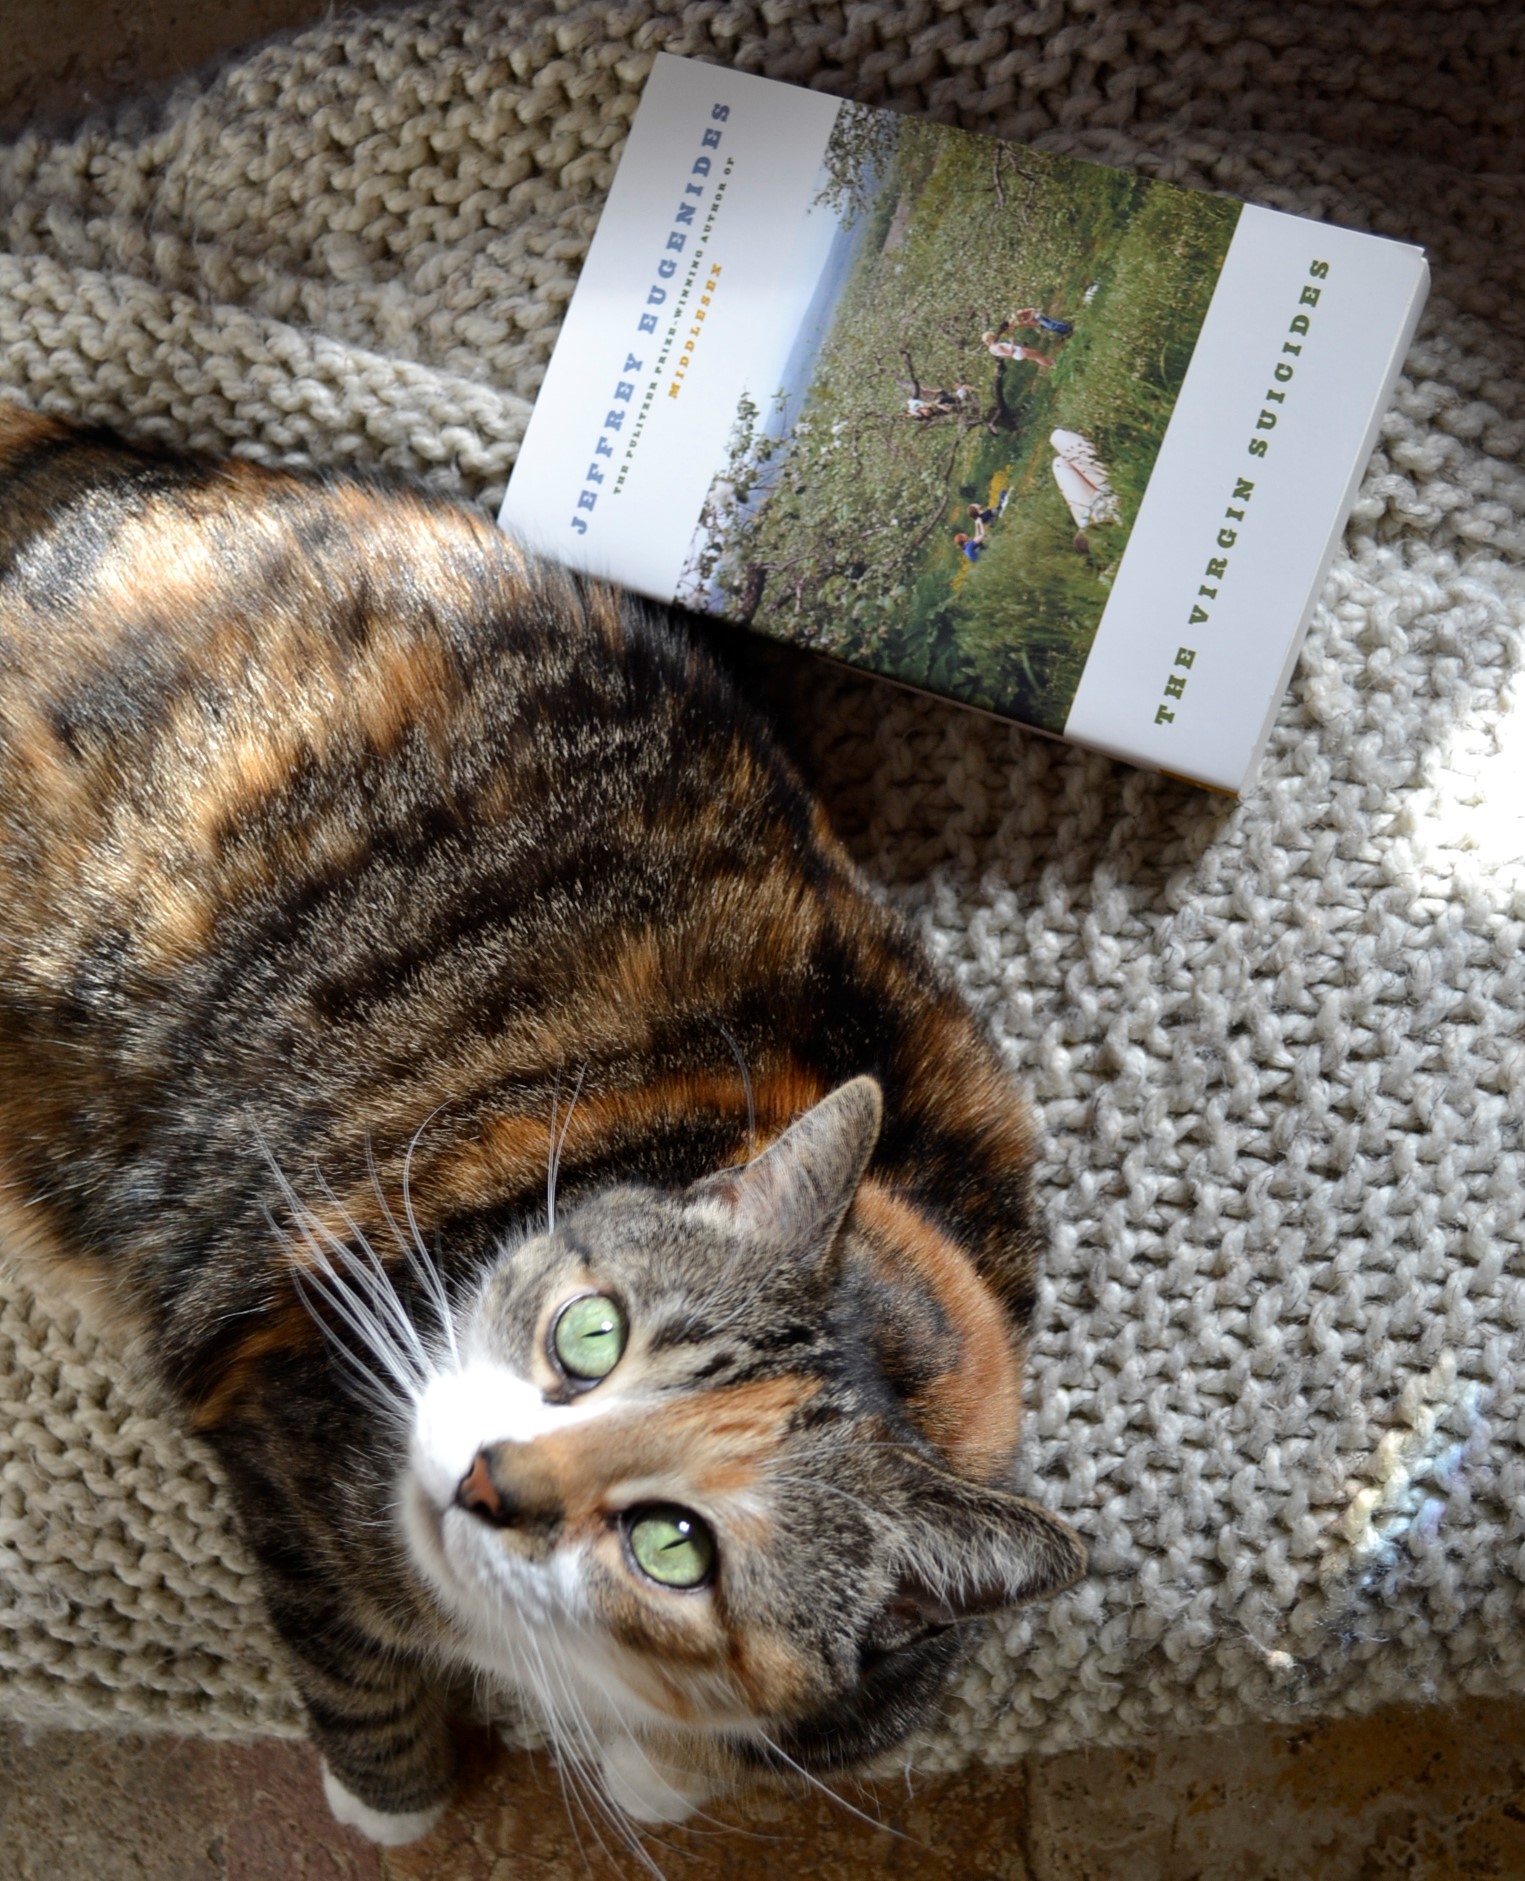 A calico tabby blinks into the sun. Beside her is a book by Jeffery Eugenides.